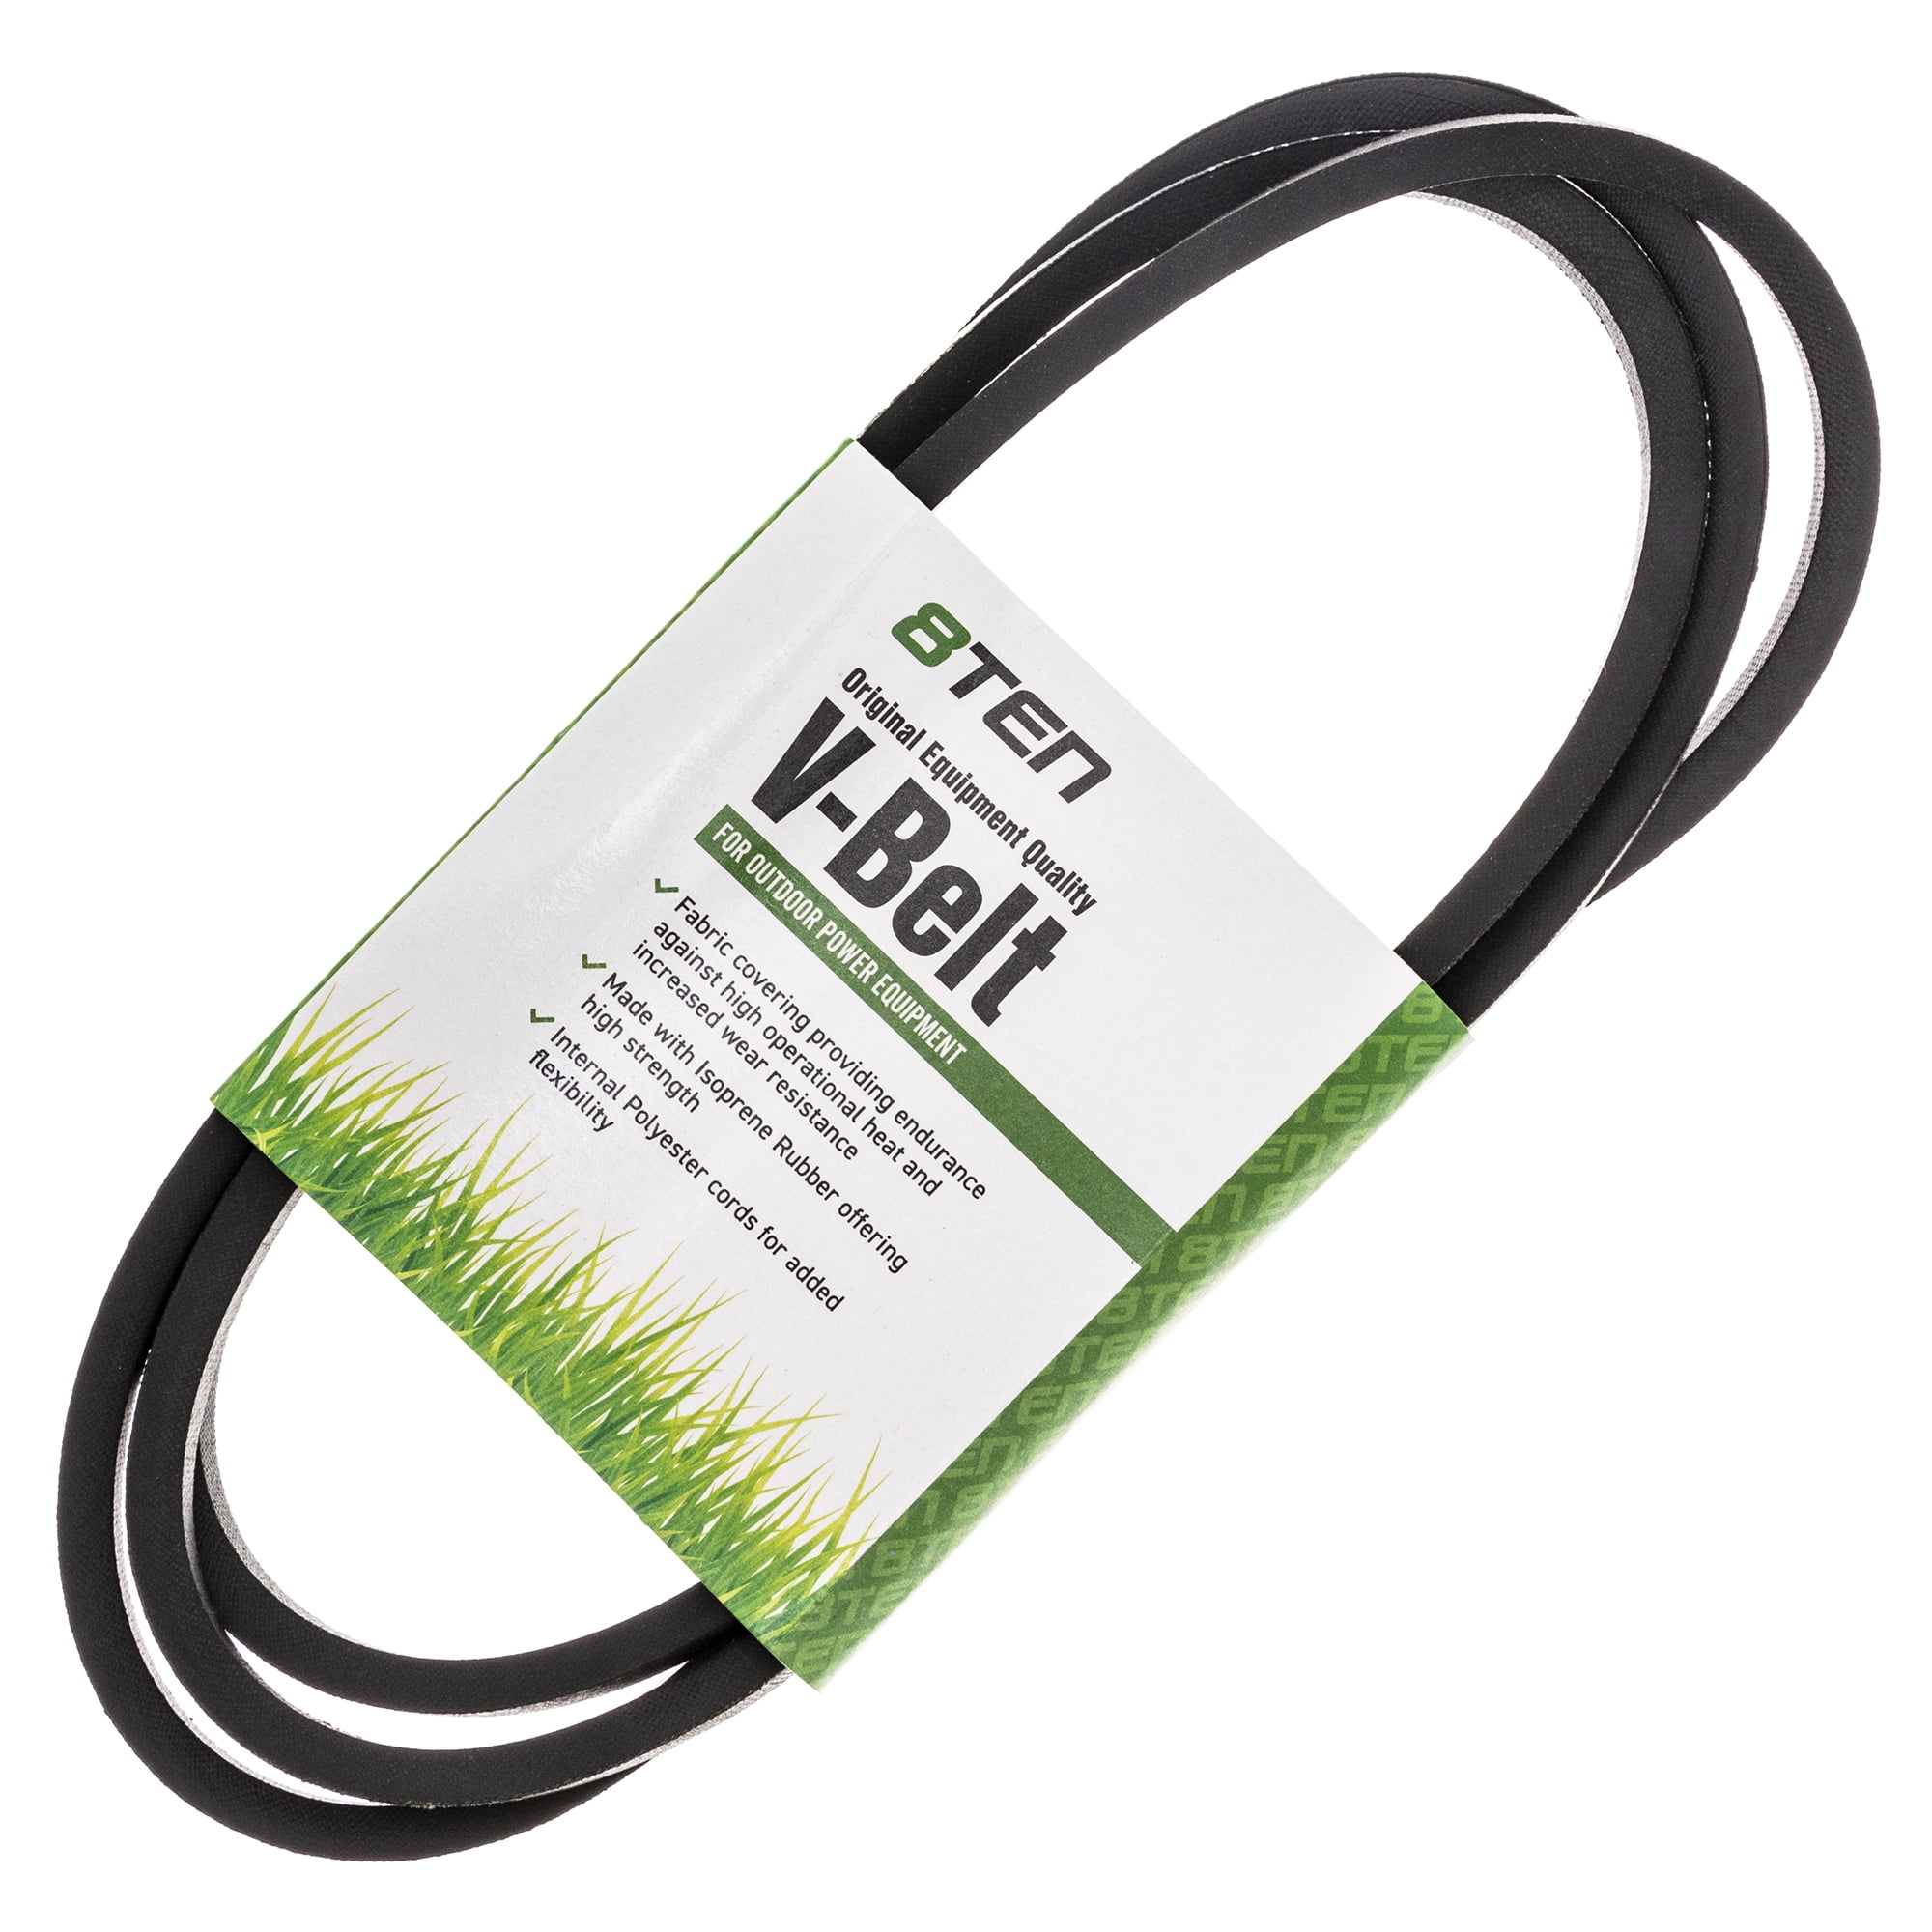 AYP AMERICAN YARD PRODUCTS 110884X made with Kevlar Replacement Belt